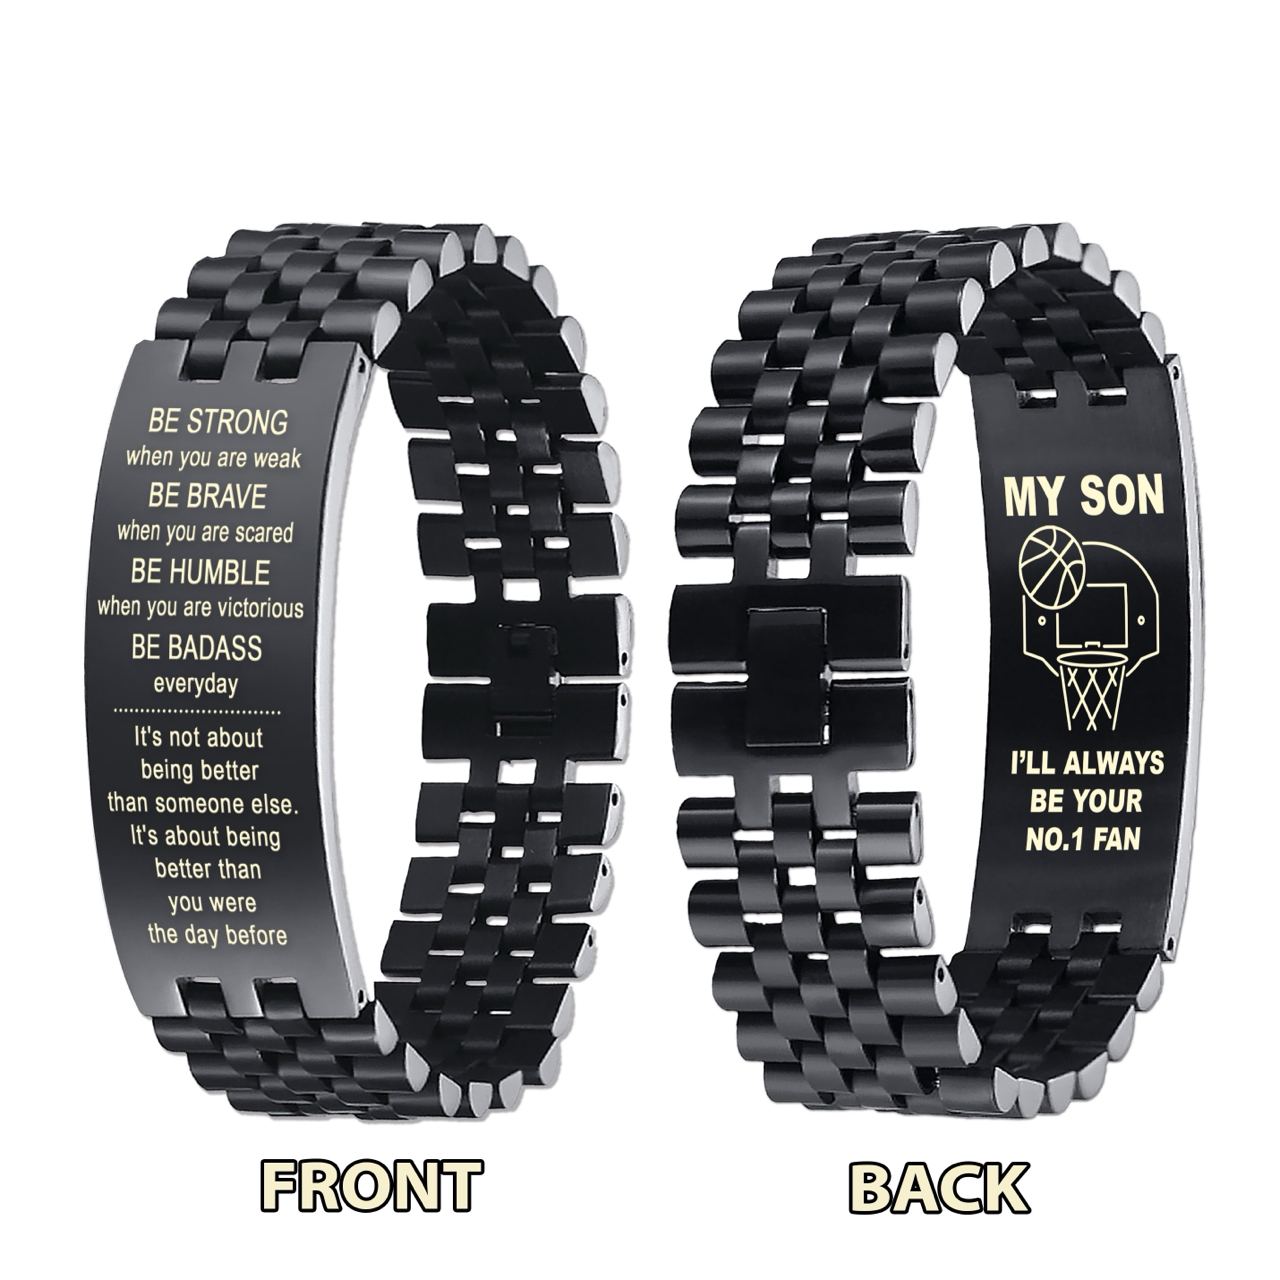 DS5 Customizable basketball bracelet, gifts from dad mom to son- I hope you believe in yourself